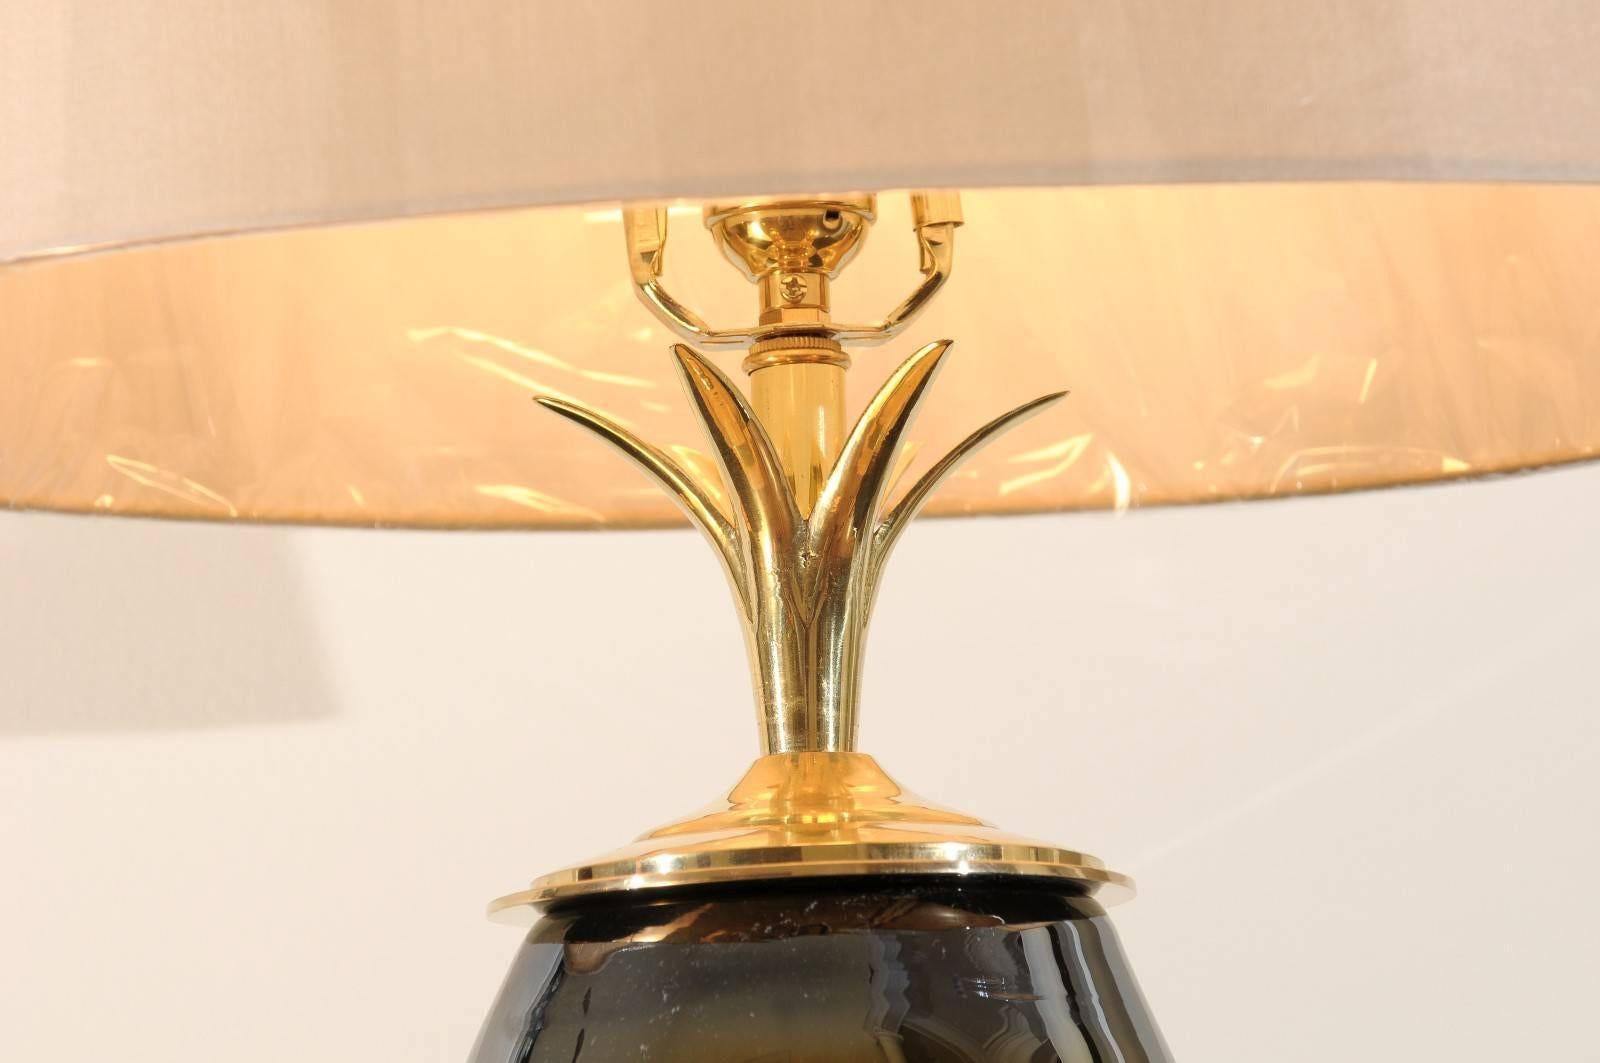 Mesmerizing Pair of Iridescent Blown Glass Lamps with Brass and Lucite Accents For Sale 3